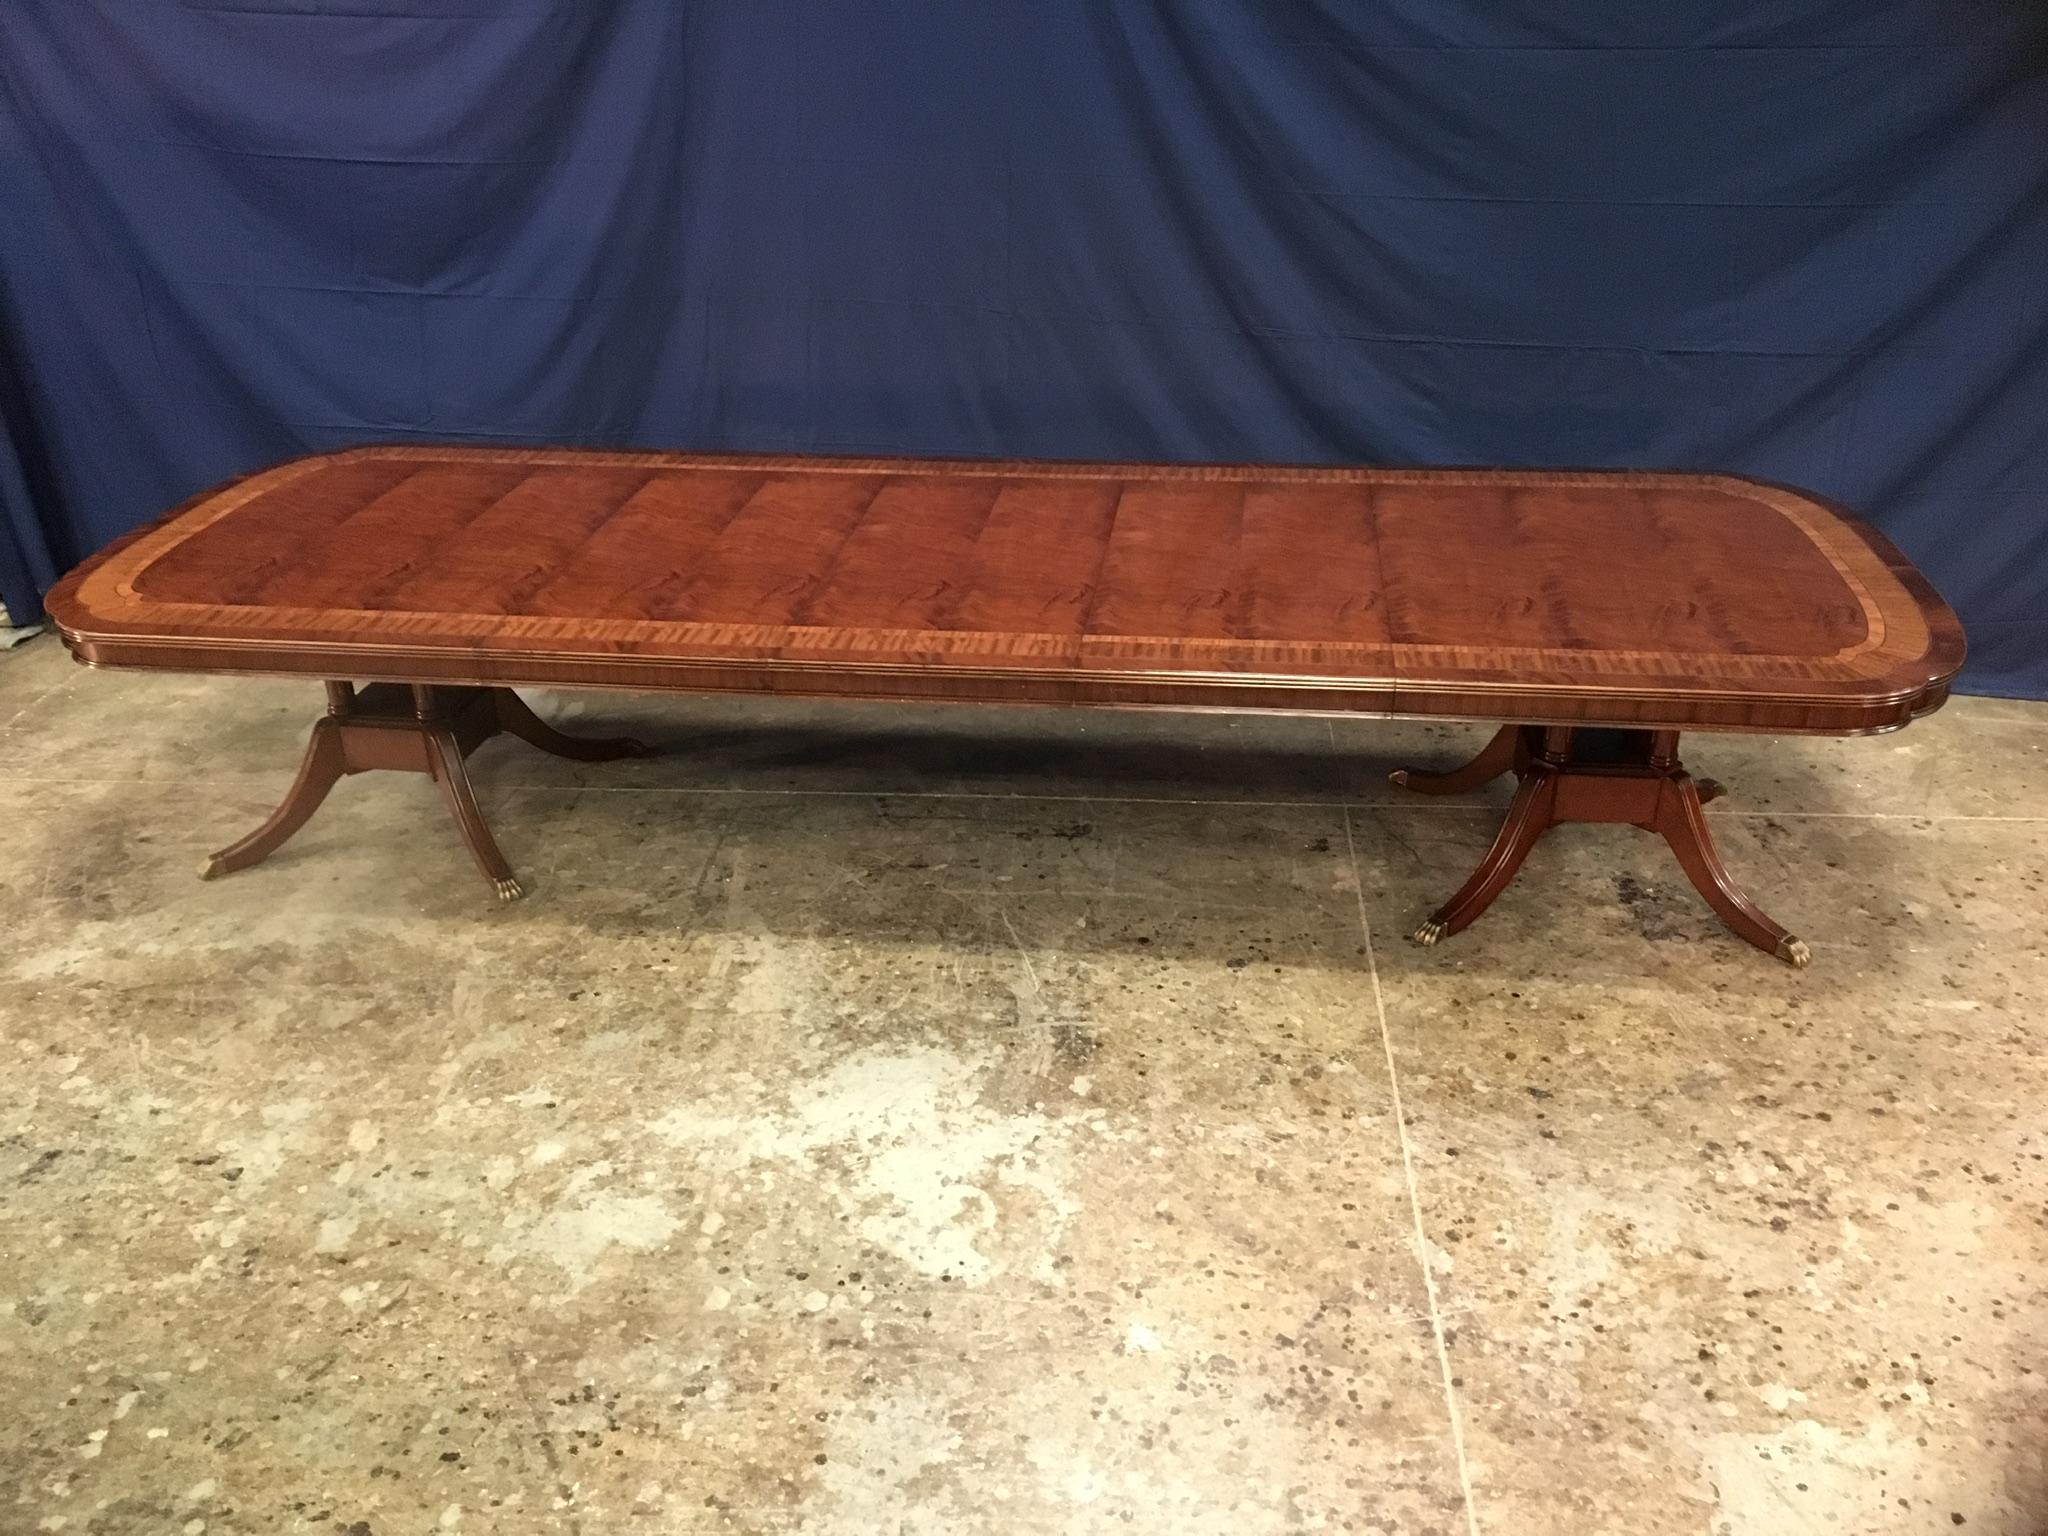 This is a made-to-order large traditional mahogany banquet/dining table made in the Leighton Hall shop. It features a classic scallop corner design with a field of slip-matched swirly crotch mahogany from west Africa and tulipwood, satinwood and